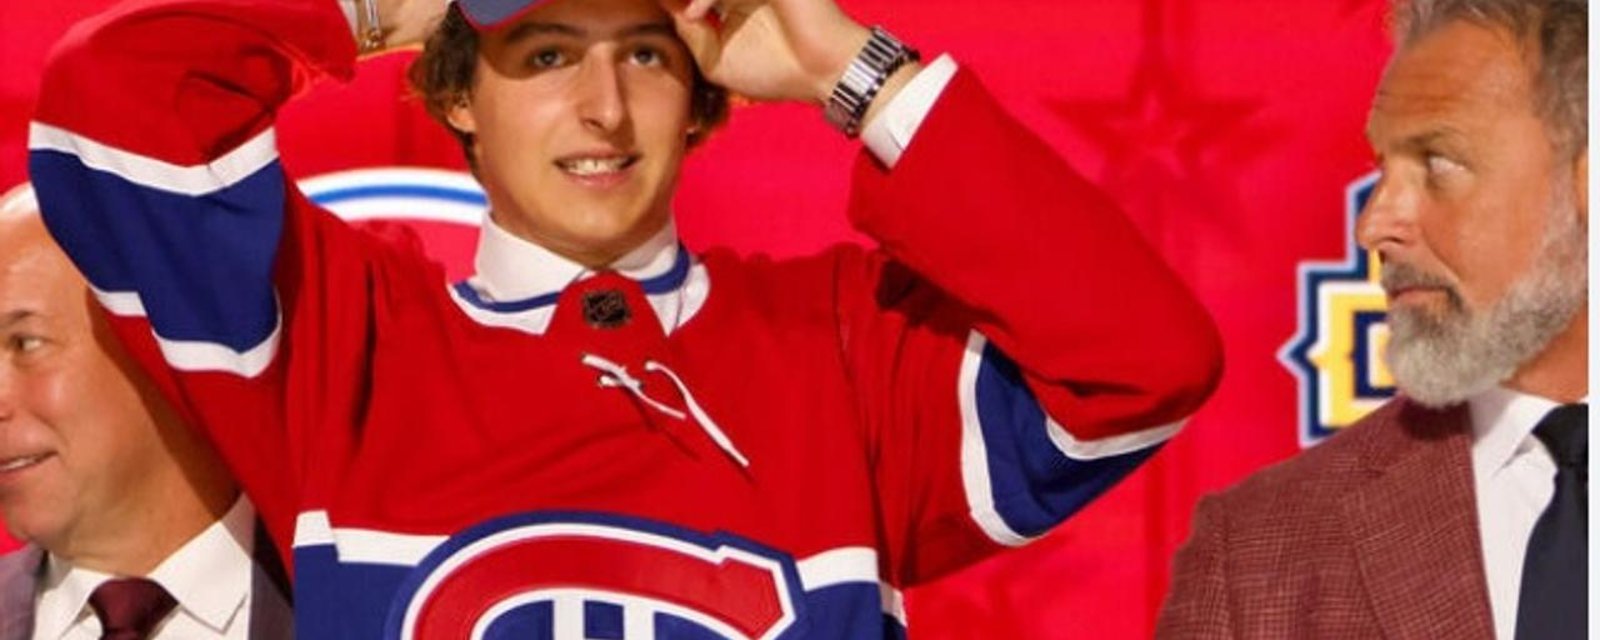 Habs’ first-rounder David Reinbacher receives hate messages and death threats from fans in Montreal